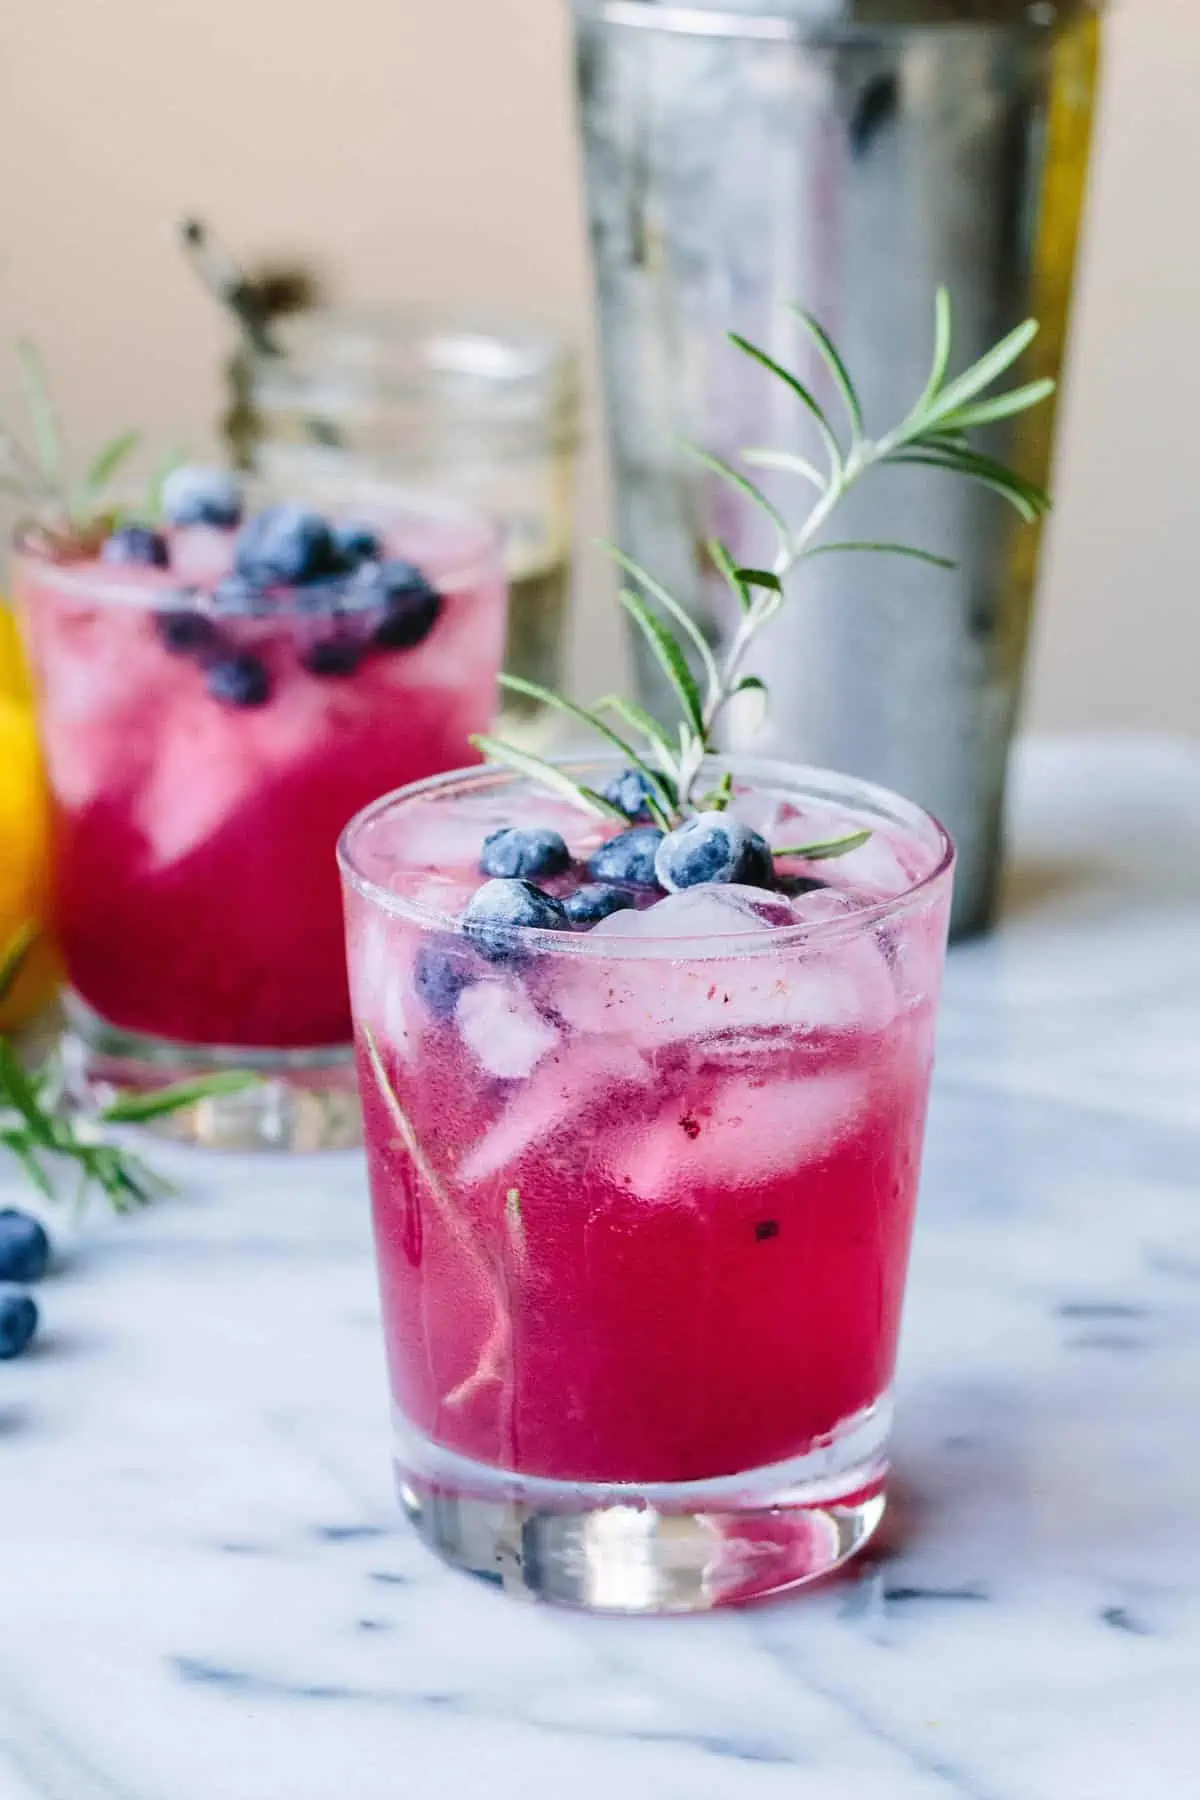 Close up of a glass of bluberry vodka spritzer with fresh blueberries and a sprig of rosemary.